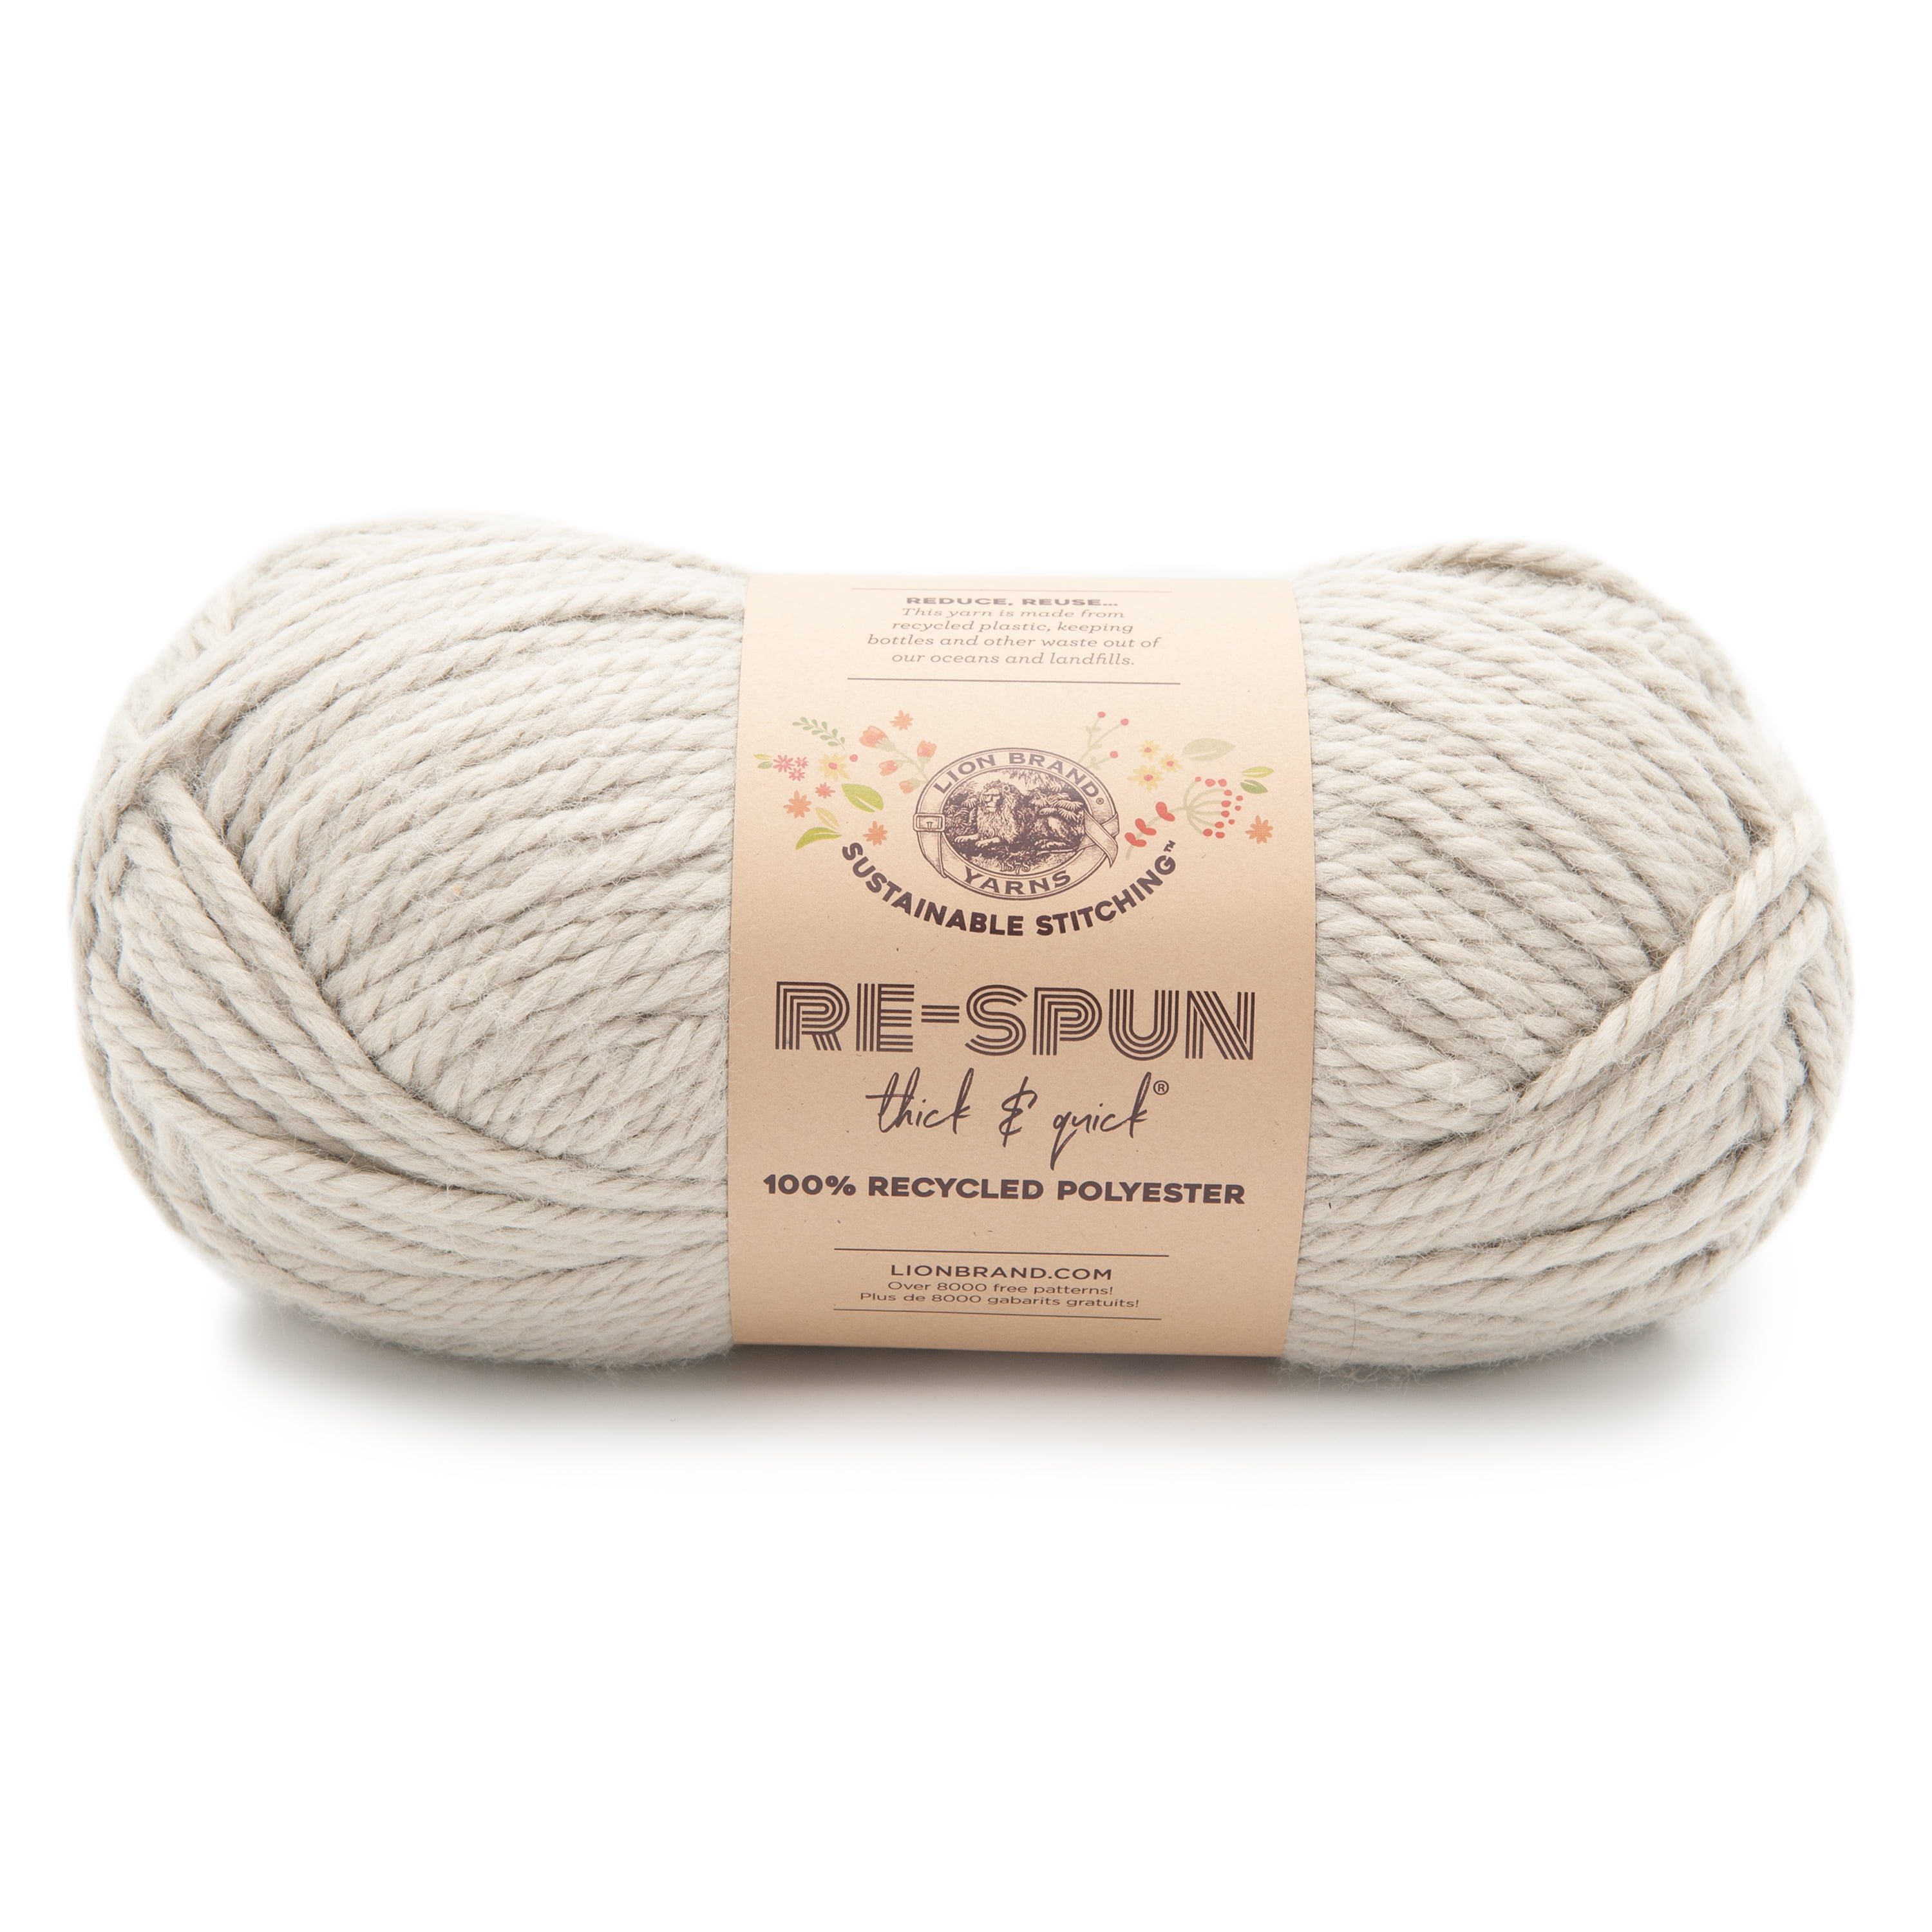 Lion Brand Re-Spun Thick and Quick Yarn-Silver - 20281830